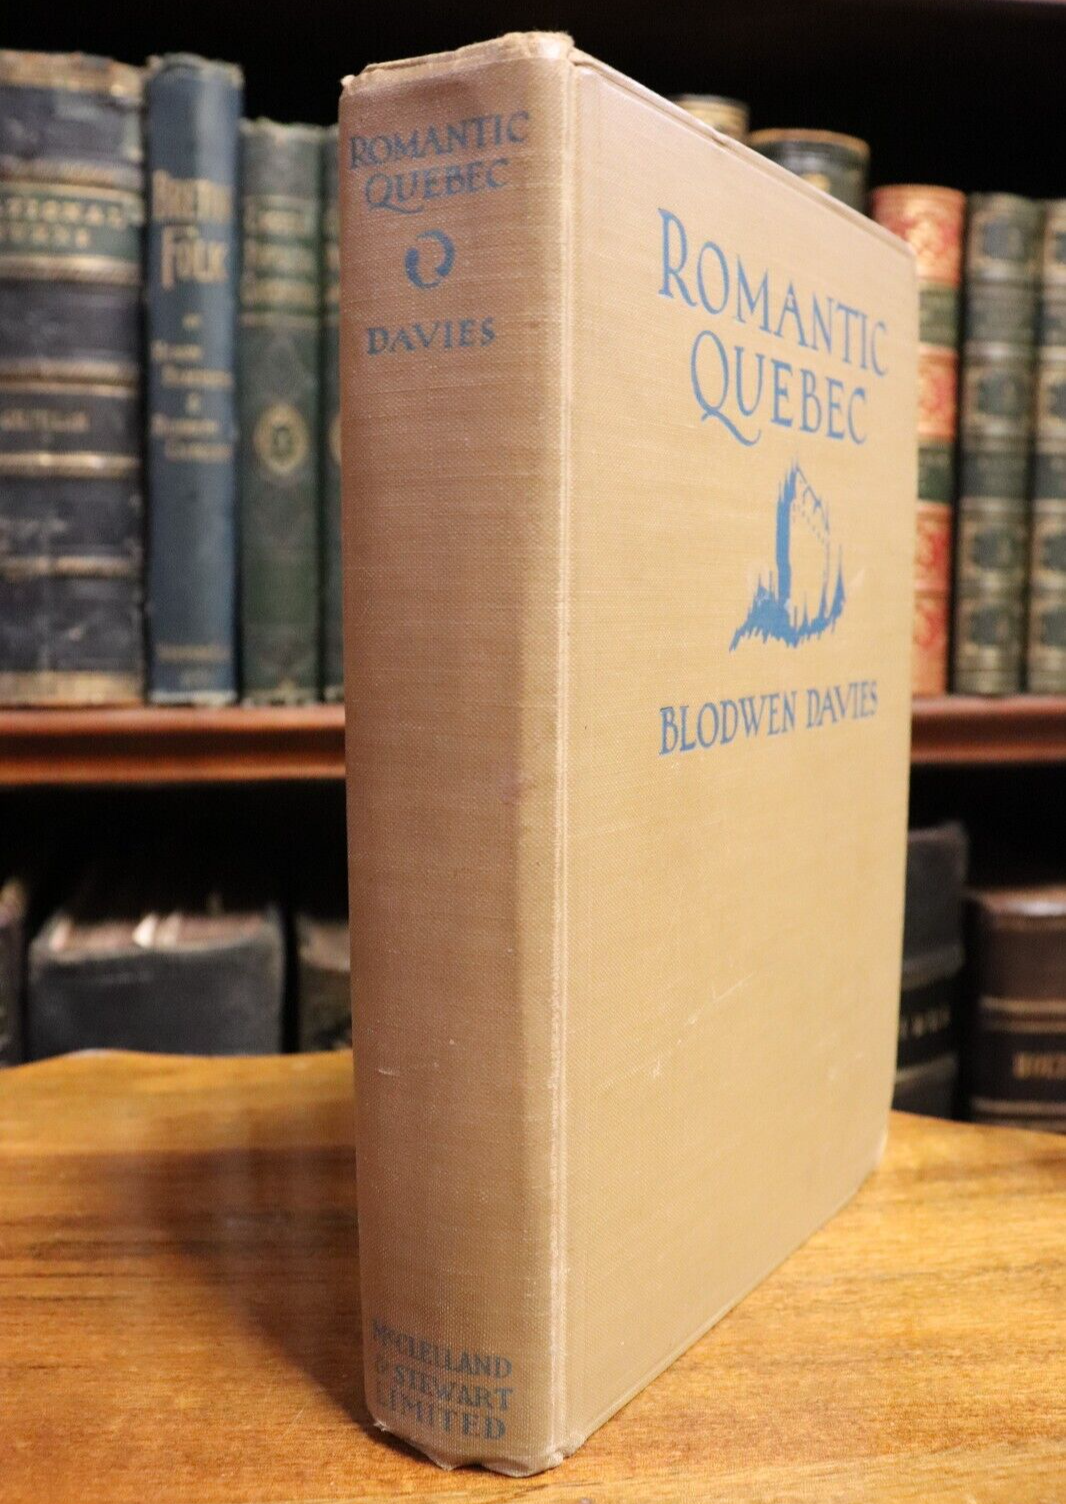 1932 Romantic Quebec by B. Davies 1st Edition Antique Canadian History Book